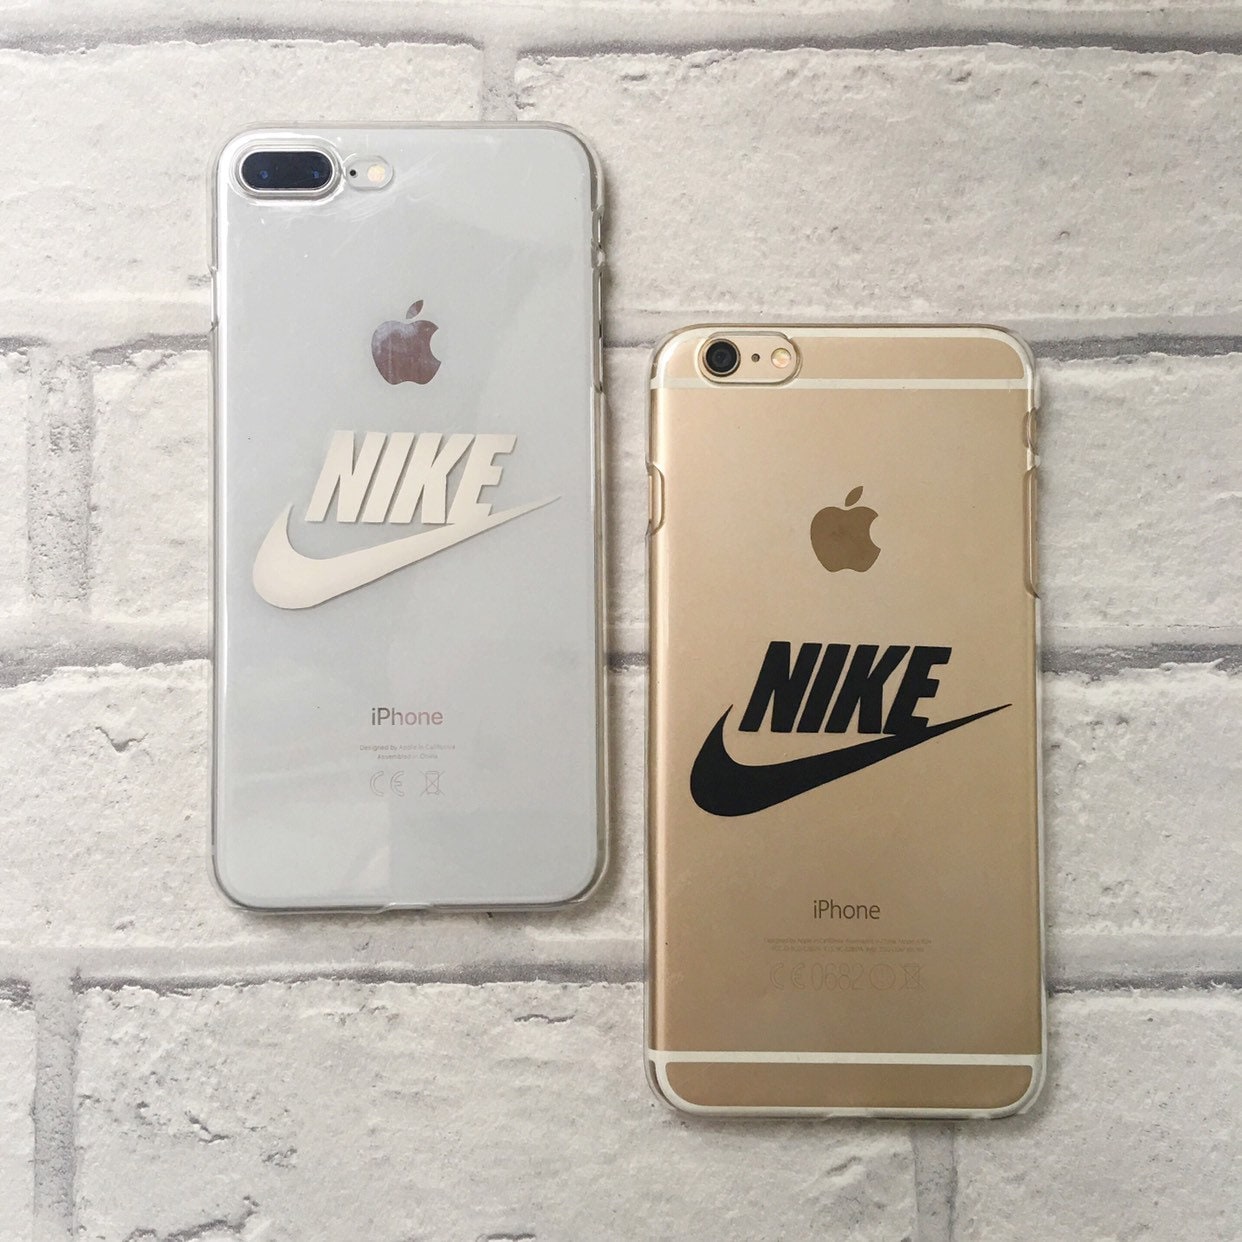 Nike clear phone case hard or protective gel option for iPhone | Etsy